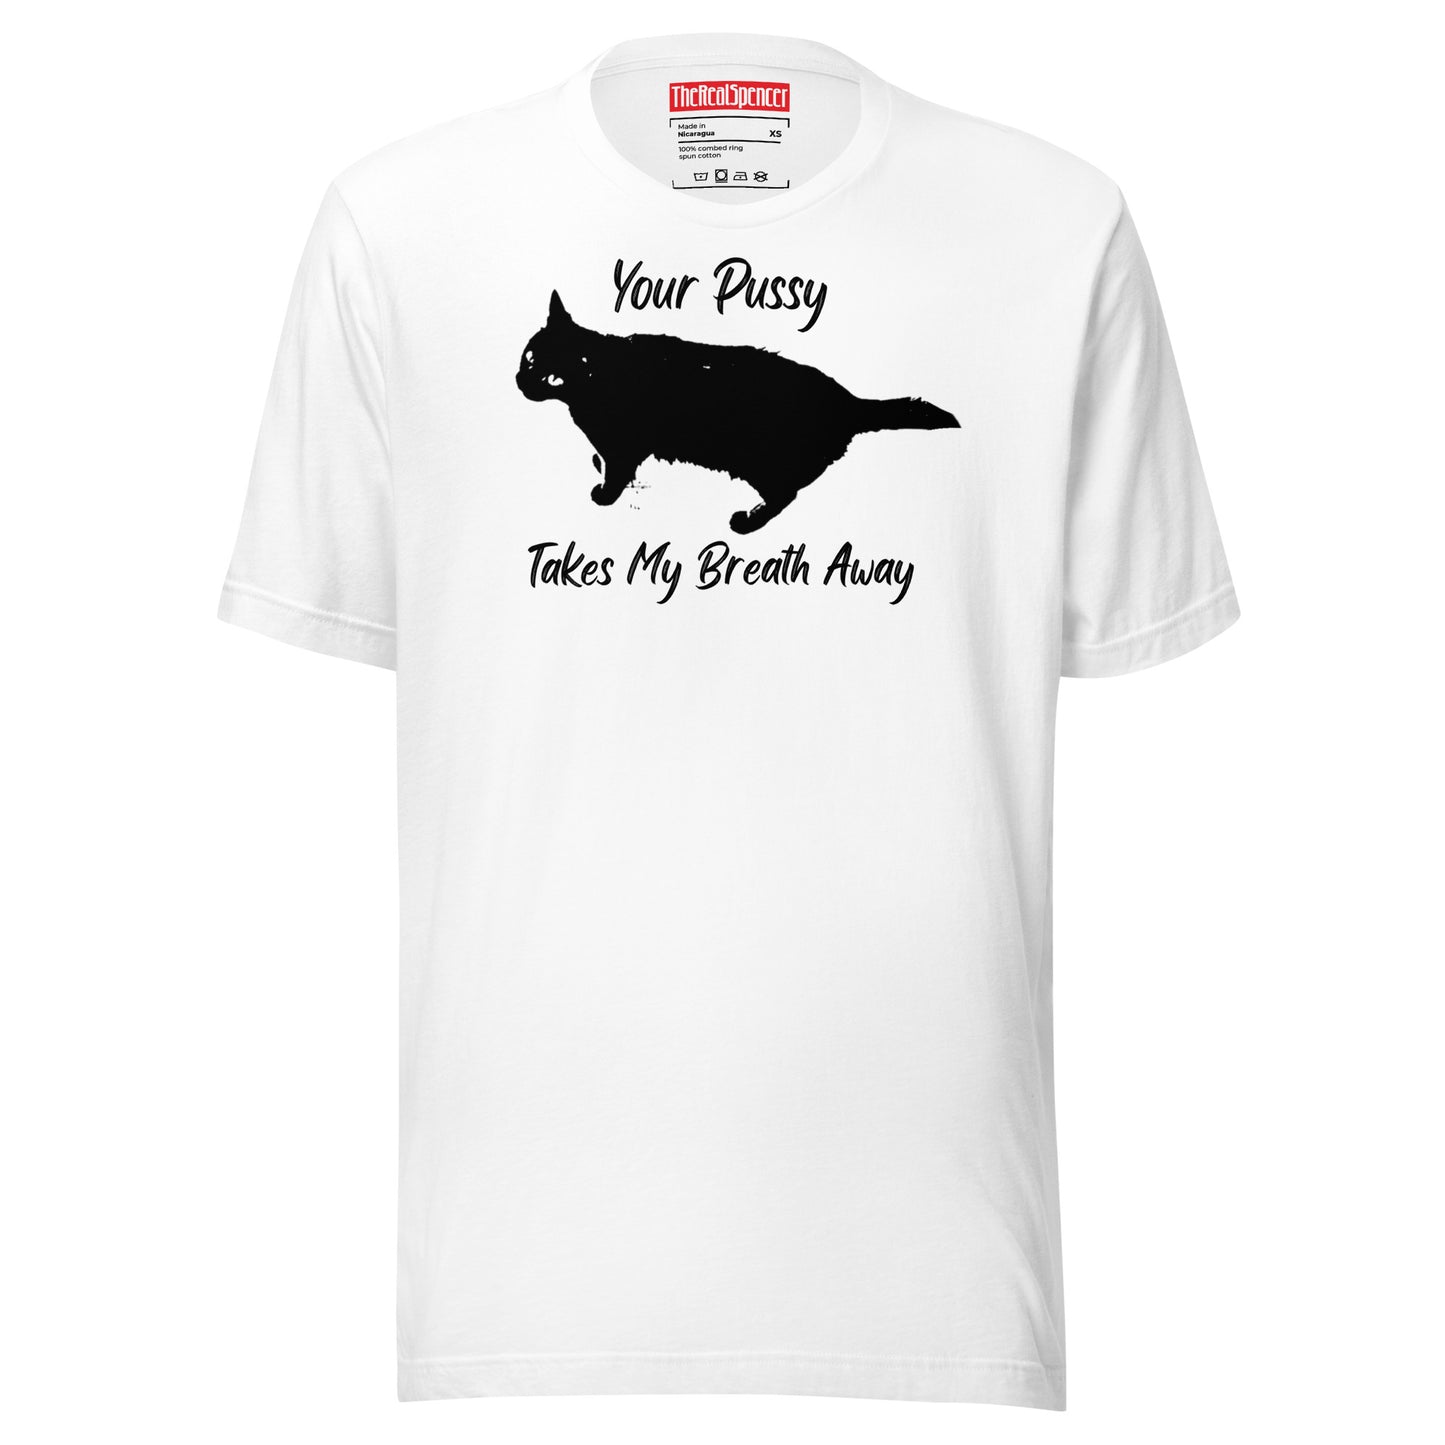 Your Pussy Takes My Breath Away T-Shirt